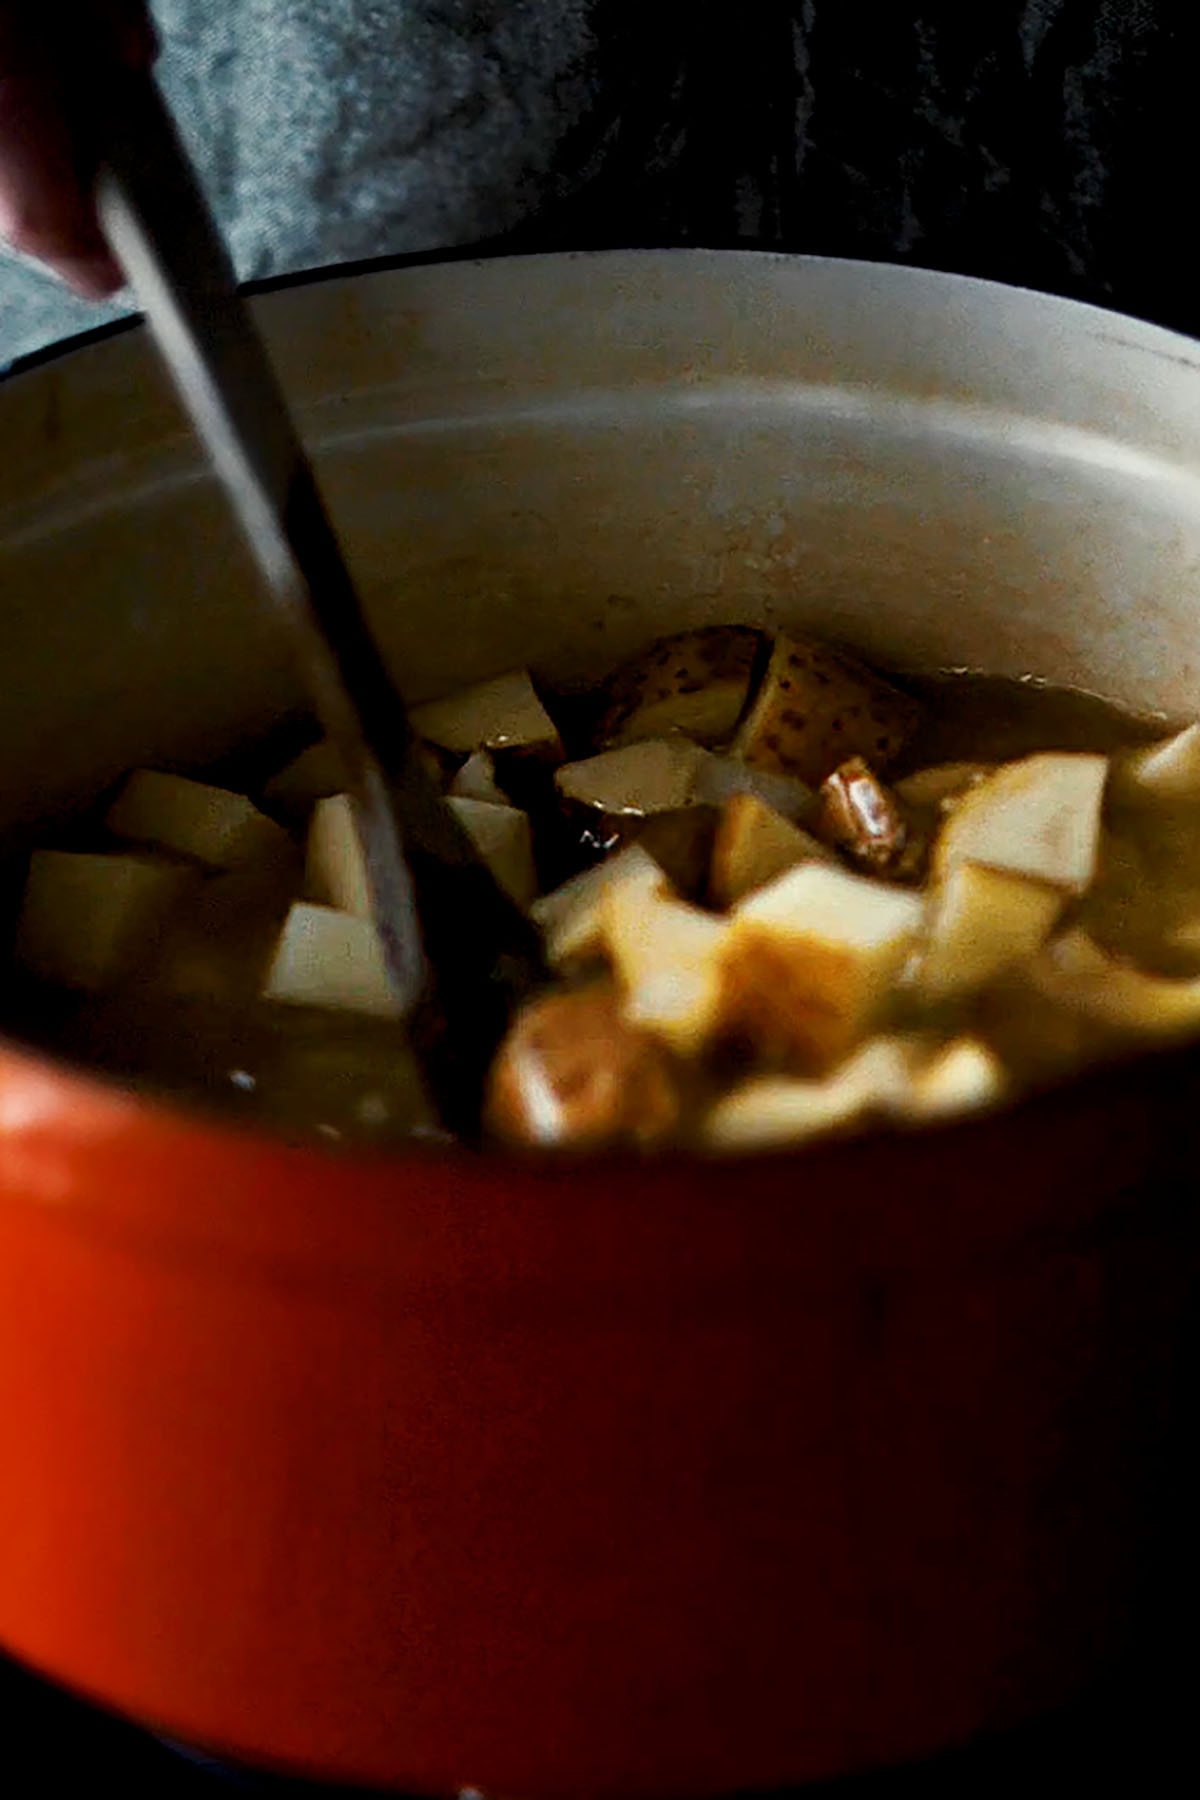 Cubed potatoes being stirred in a soup.